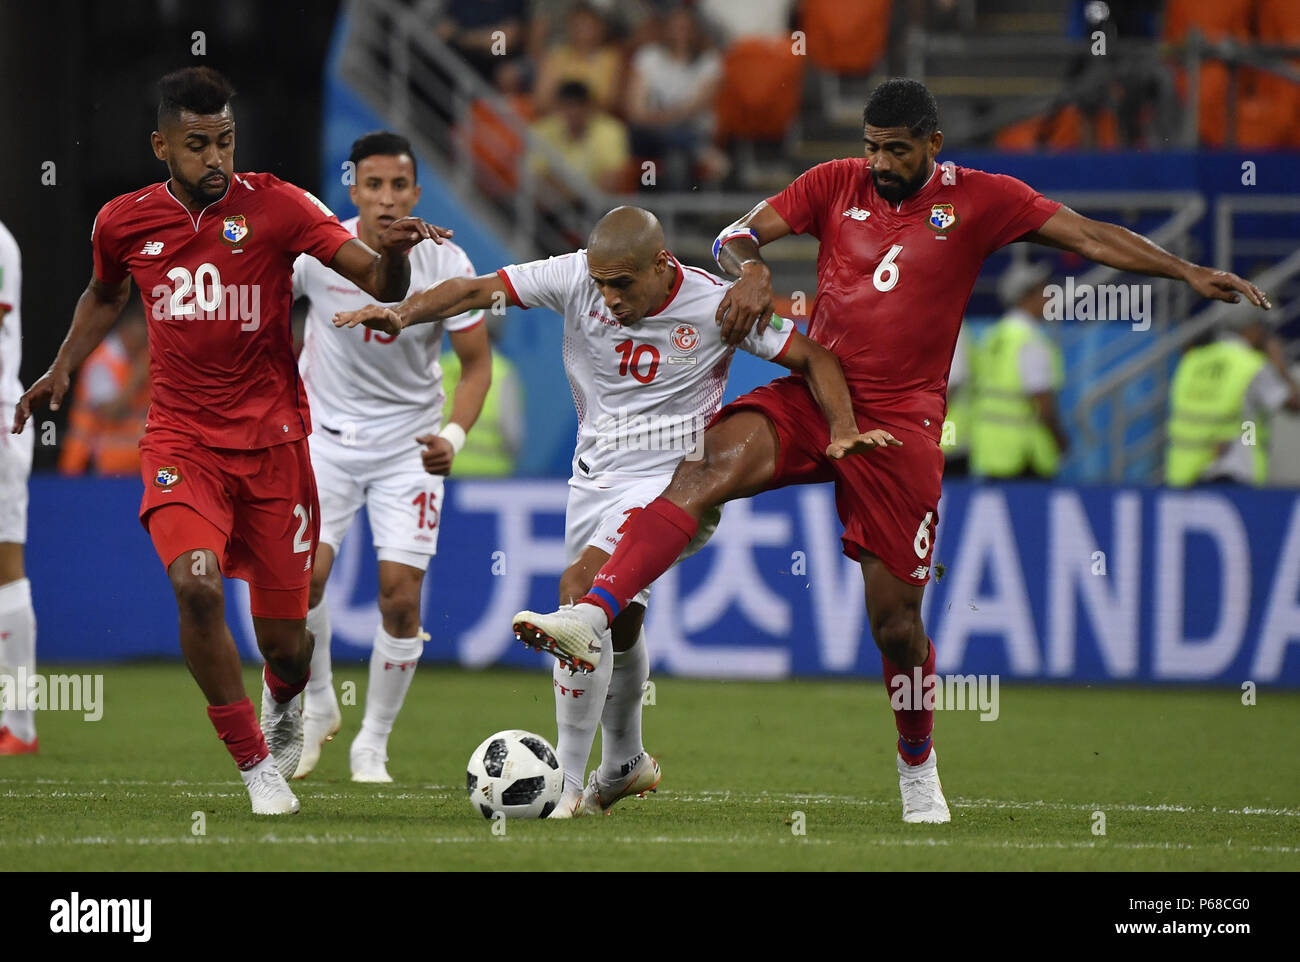 Saransk, Russia. 28th June, 2018. Gabriel Gomez (1st R) of Panama vies with Wahbi Khazri (2nd R) of Tunisia during the 2018 FIFA World Cup Group G match between Panama and Tunisia in Saransk, Russia, June 28, 2018. Tunisia won 2-1. Credit: He Canling/Xinhua/Alamy Live News Stock Photo